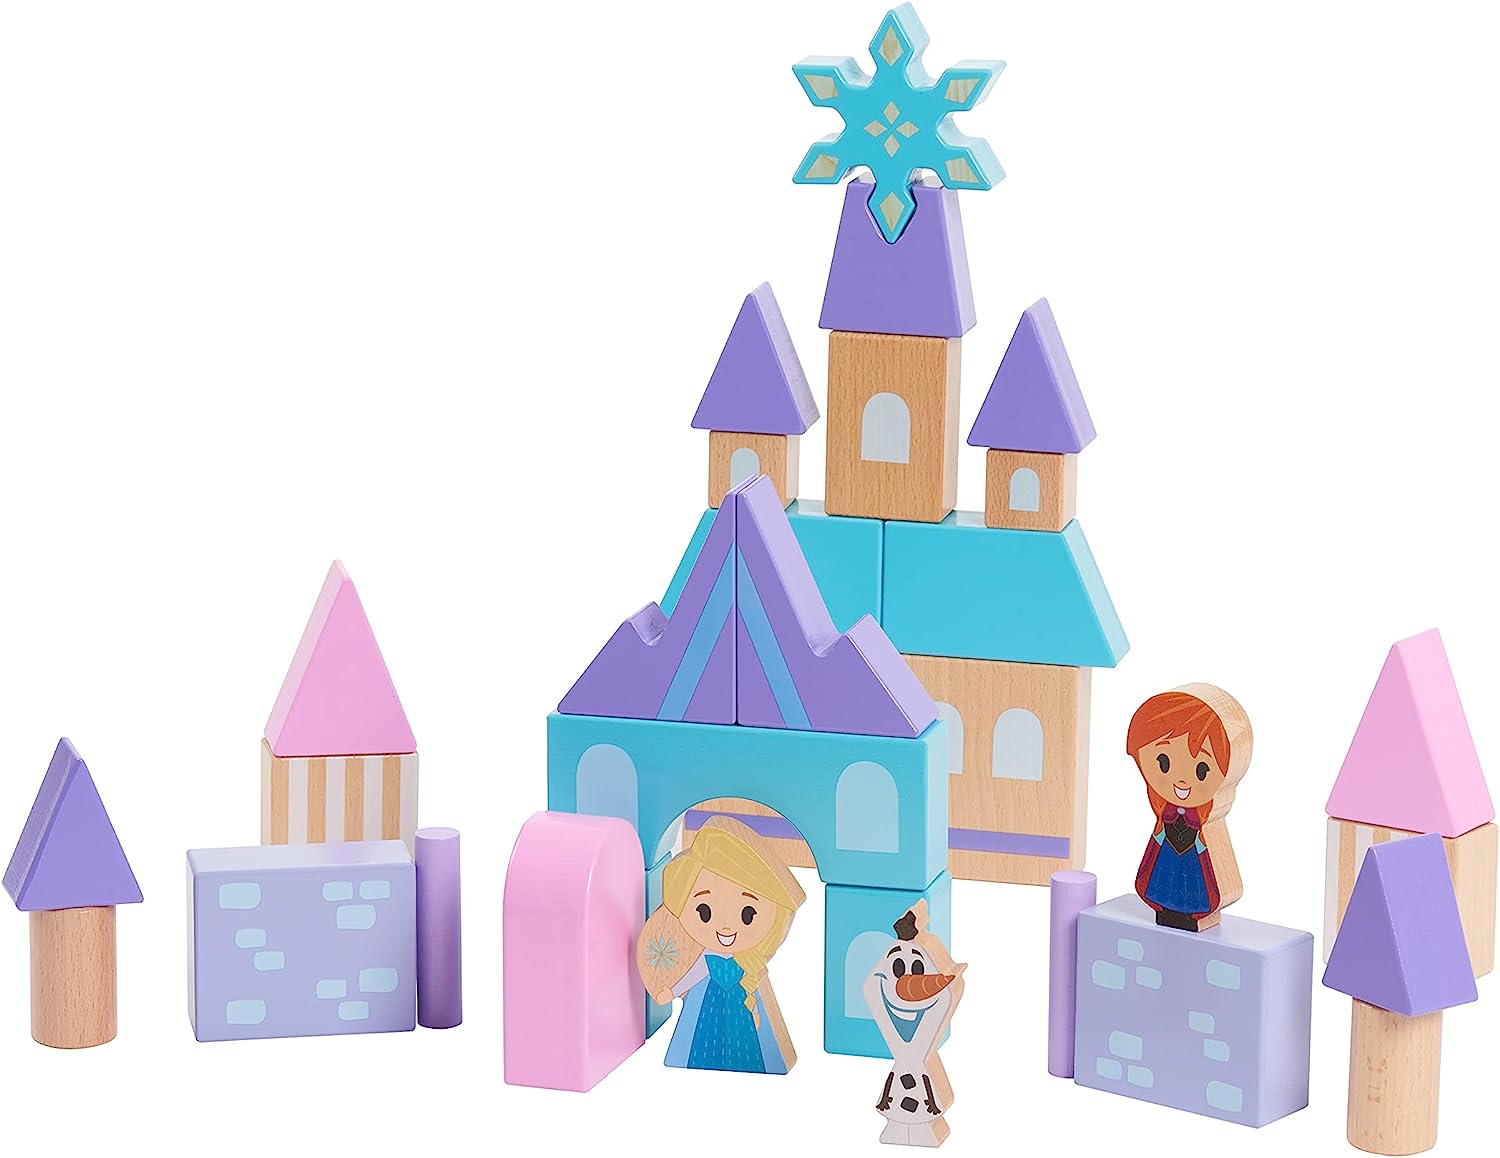 Frozen Arendelle Castle Block Set, 30+ Pieces Include Elsa, Anna, and Olaf Block Figures, Amazon Exclusive, by Just Play